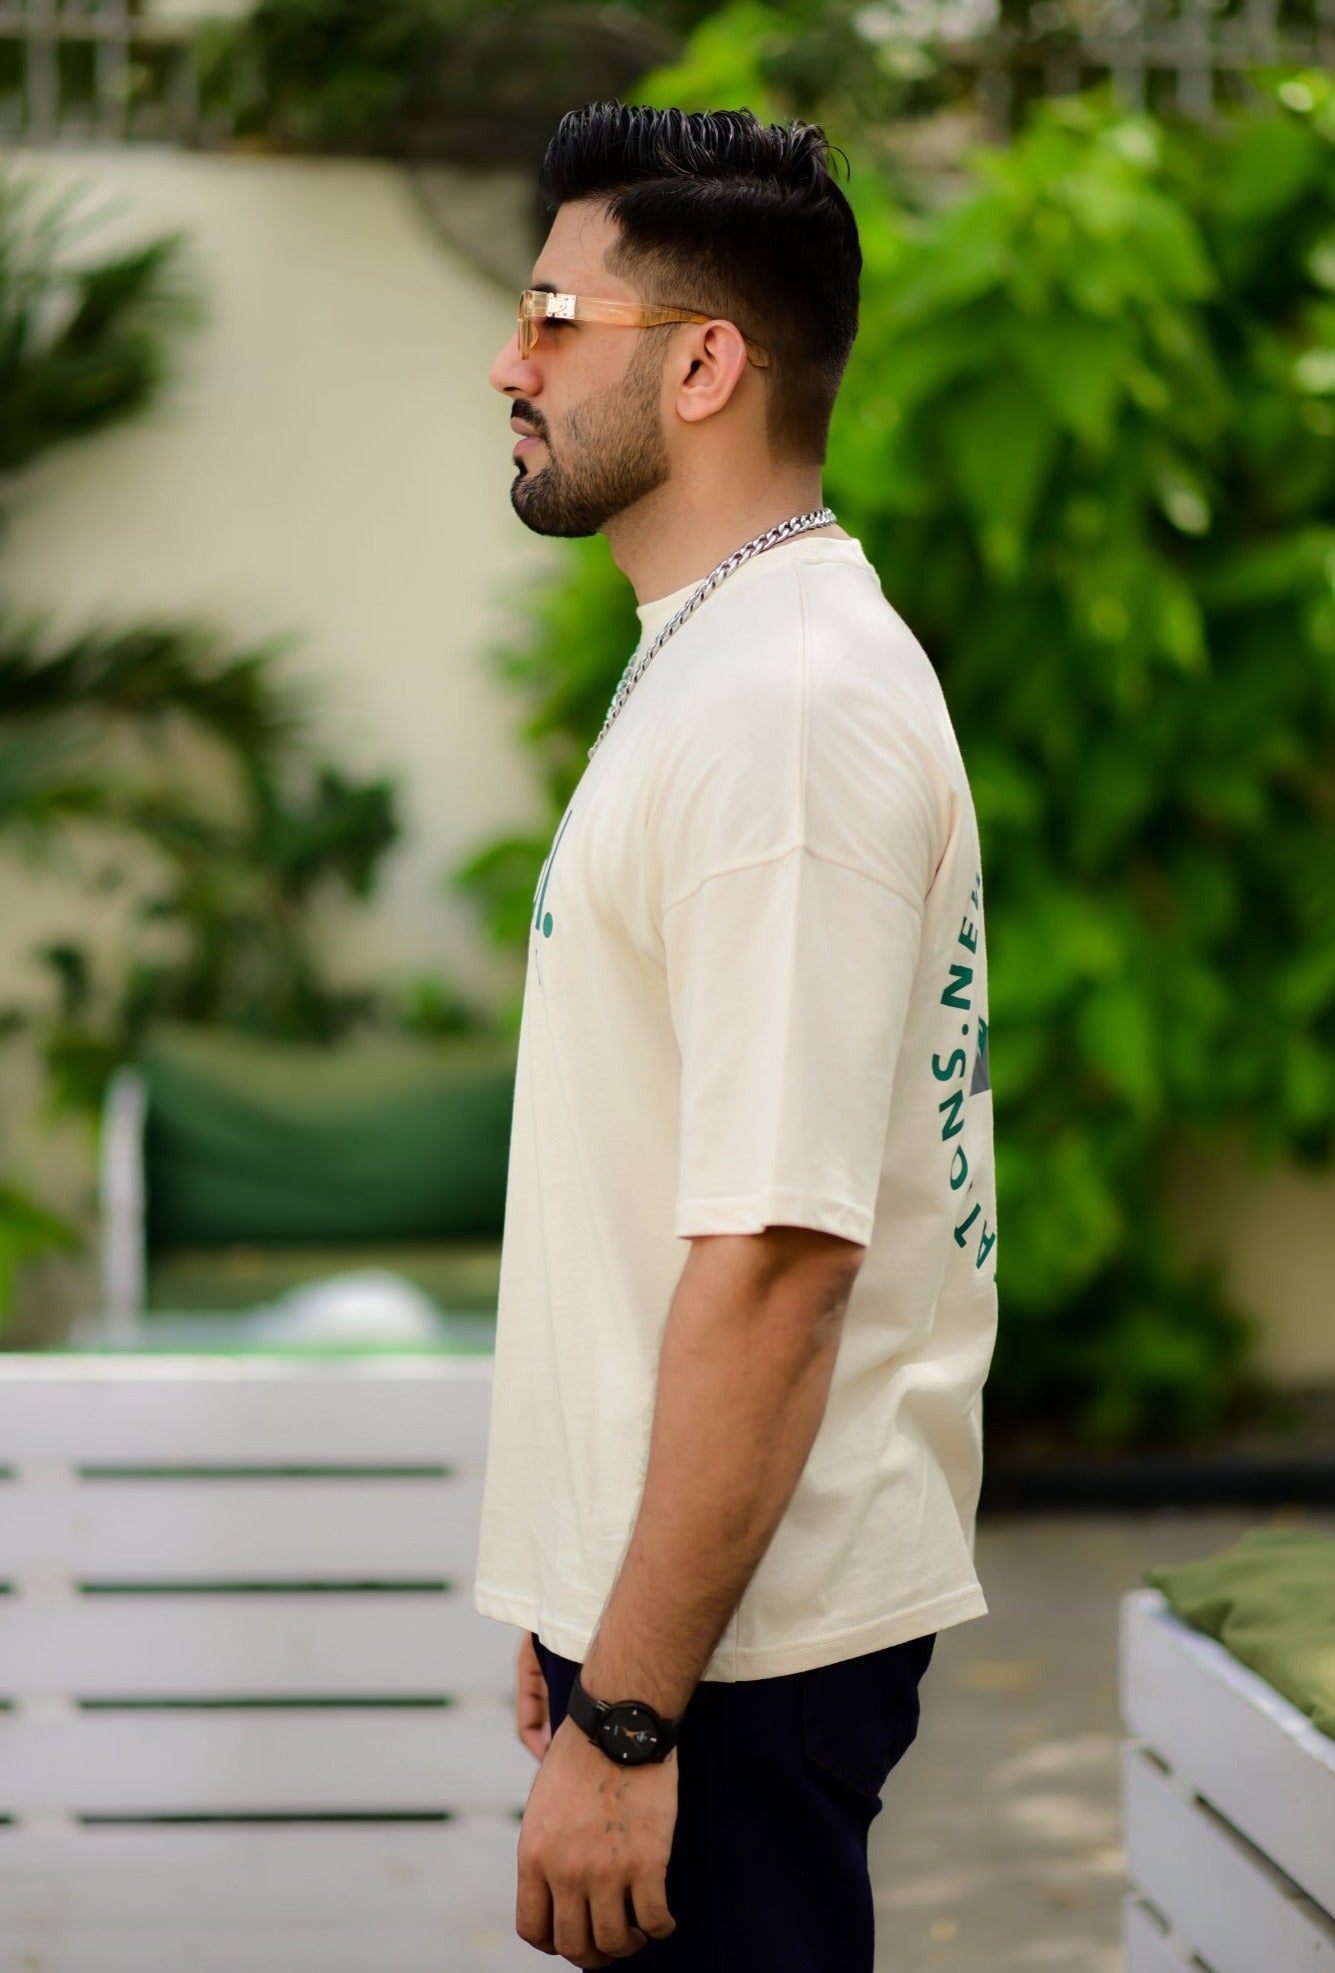 Off-white t-shirts for Men